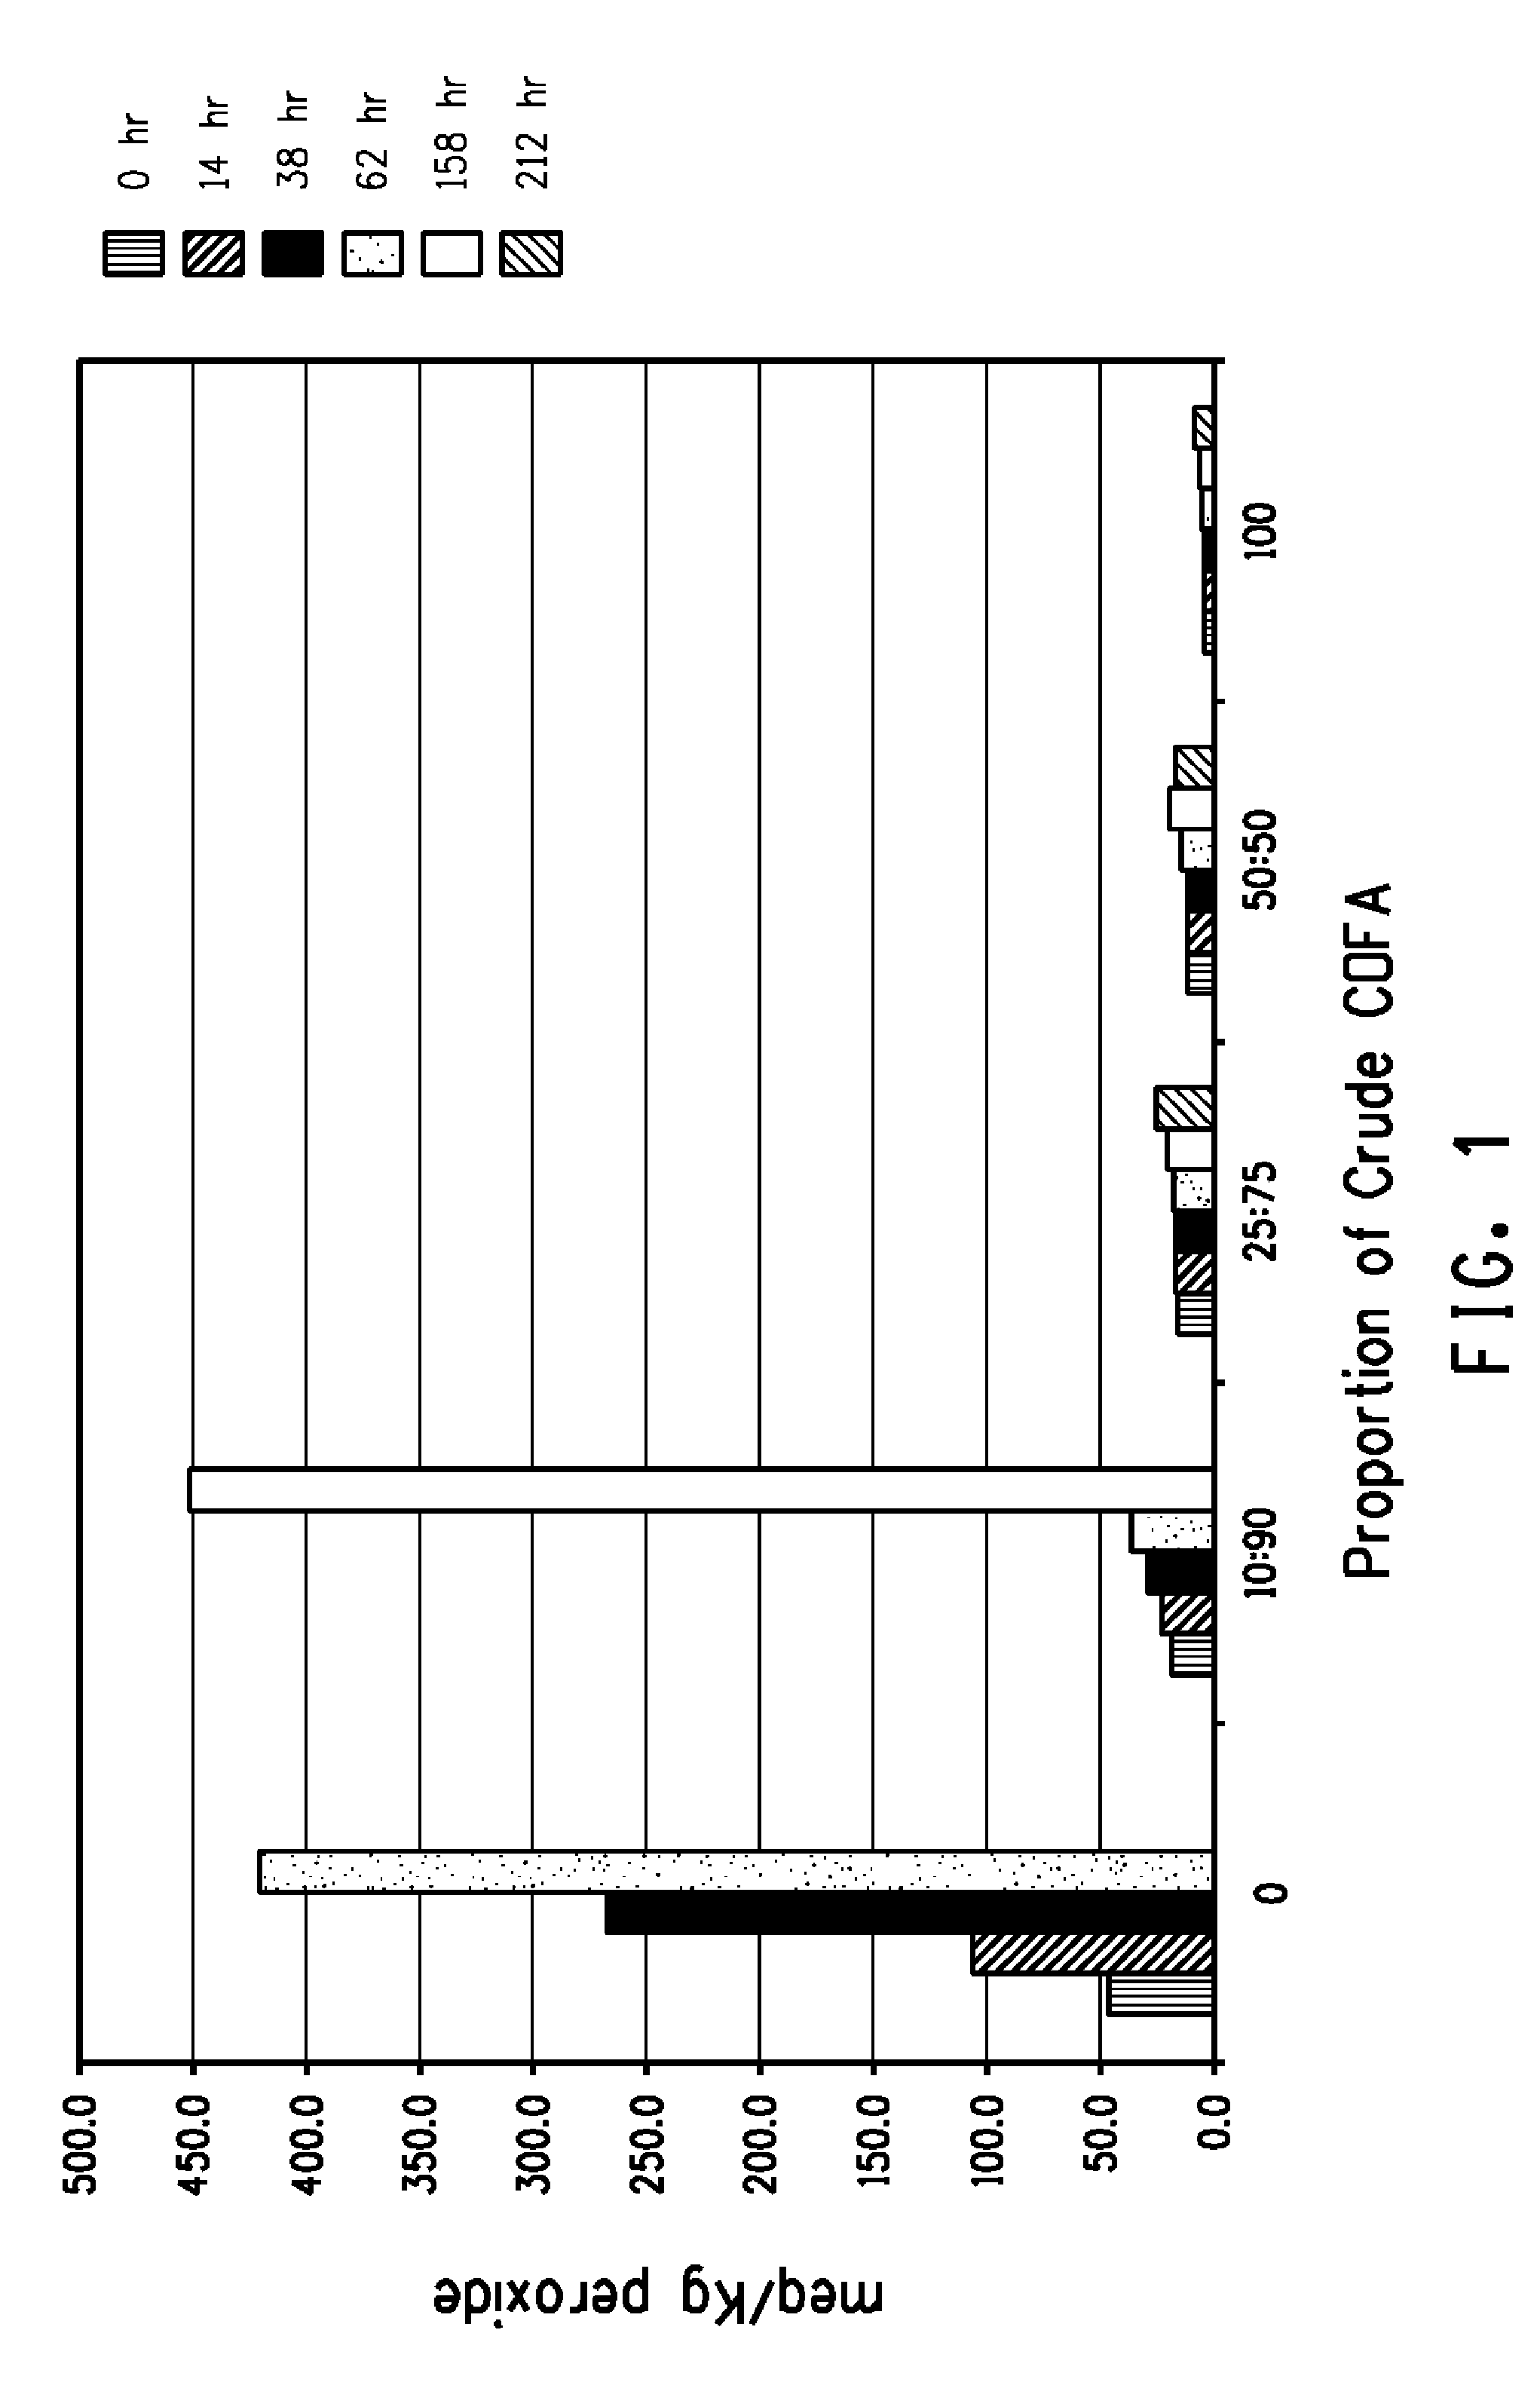 Recyclable extractant compositions